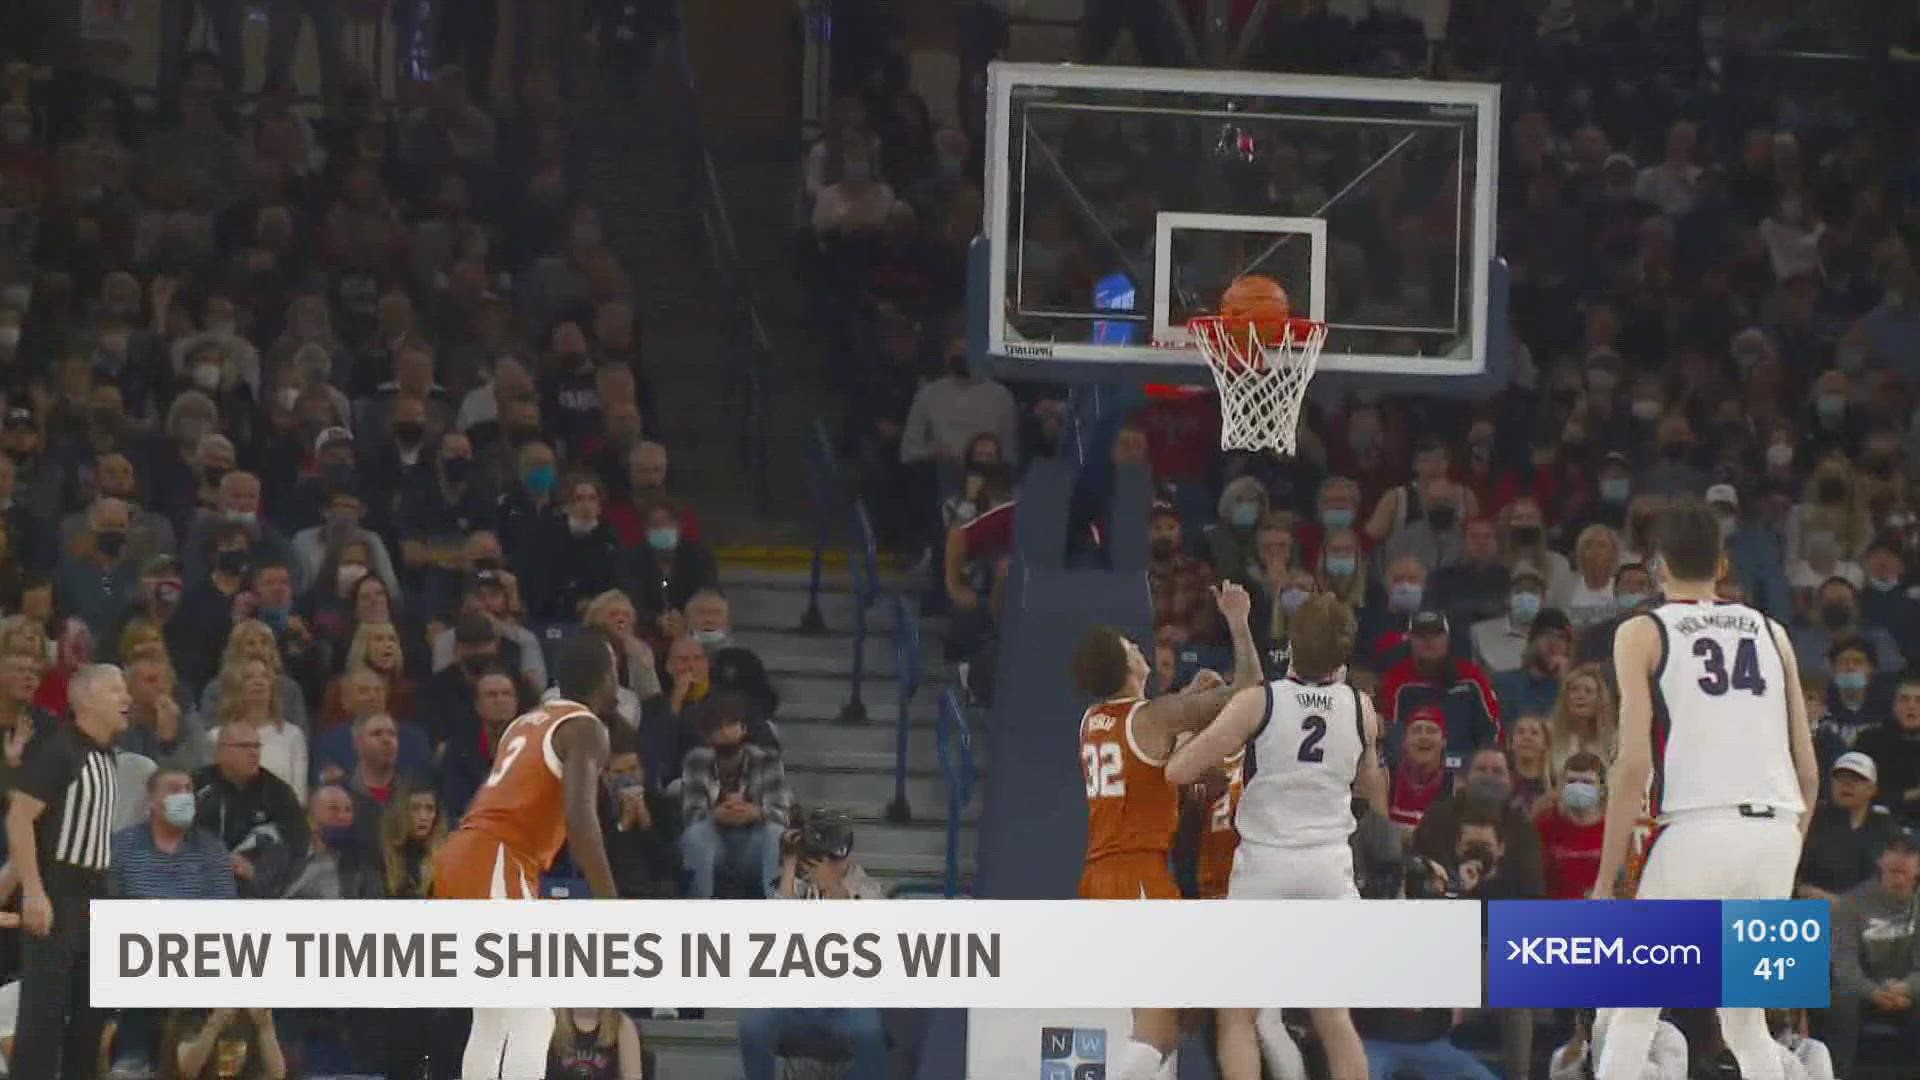 Gonzaga beat the Longhorns in Mark Few's first game back as head coach. Drew Timme scored 37 points.